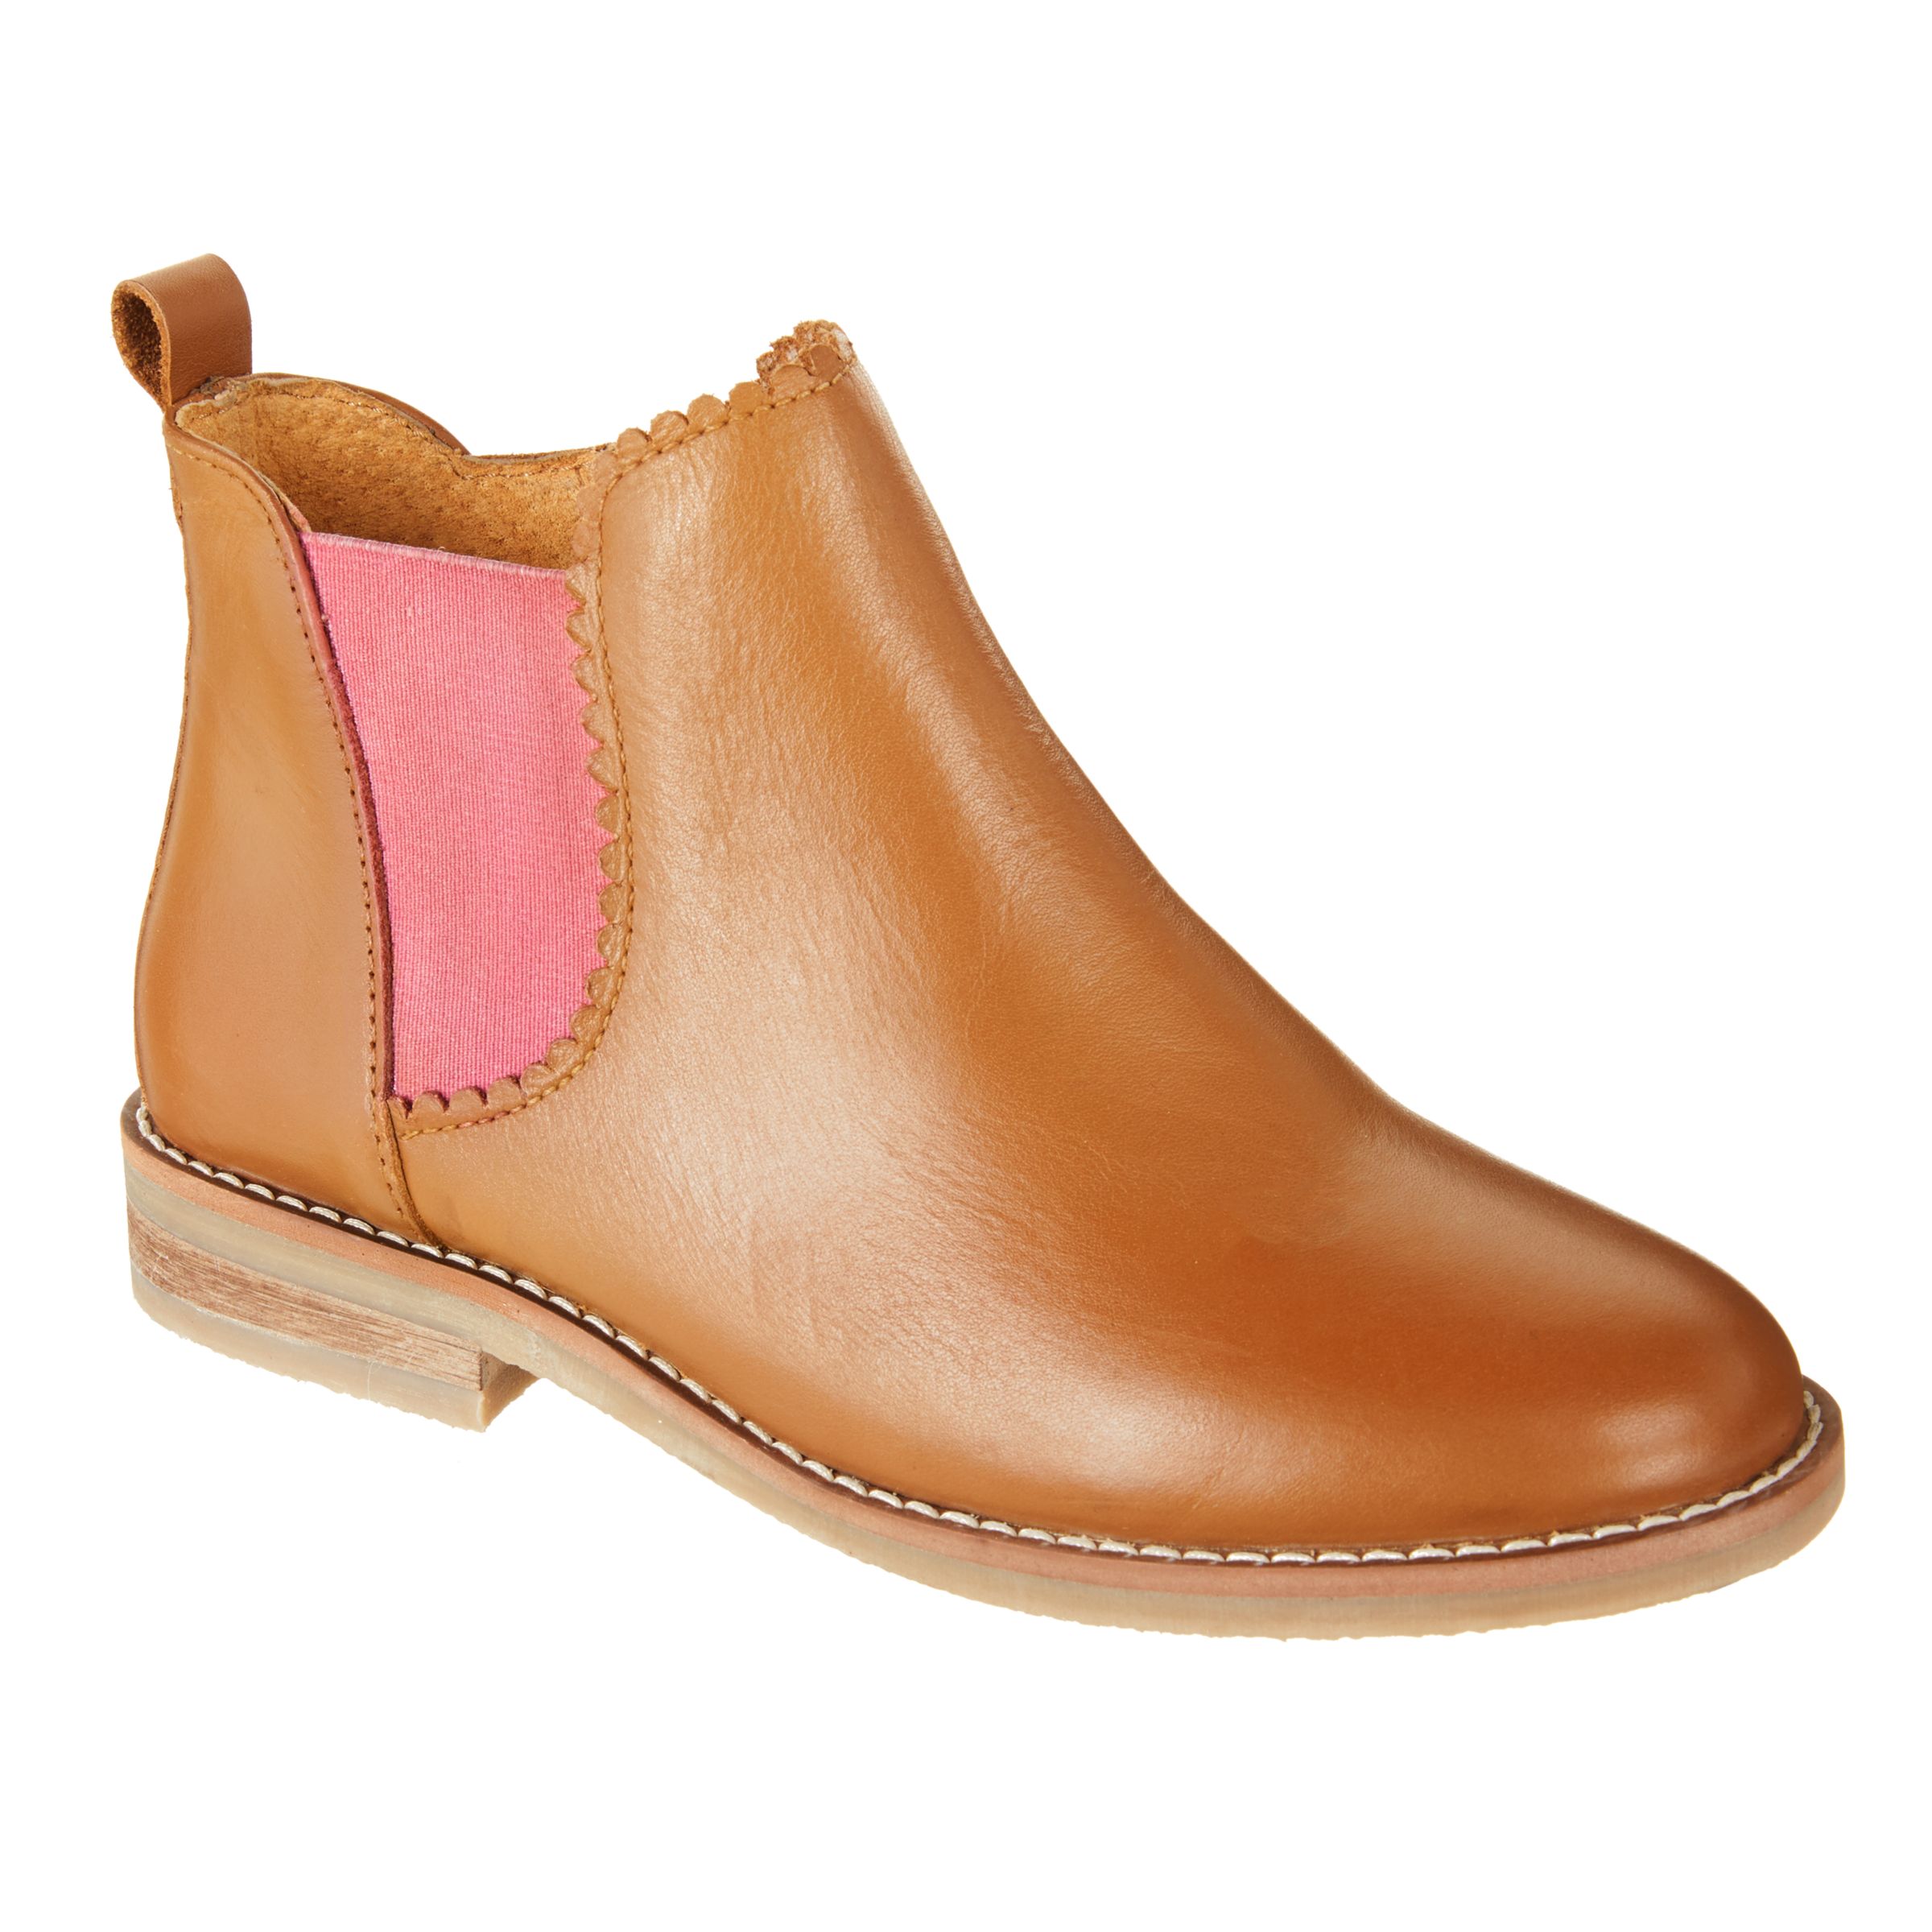 John Lewis & Partners Children's Libby Leather Chelsea Boots, Tan